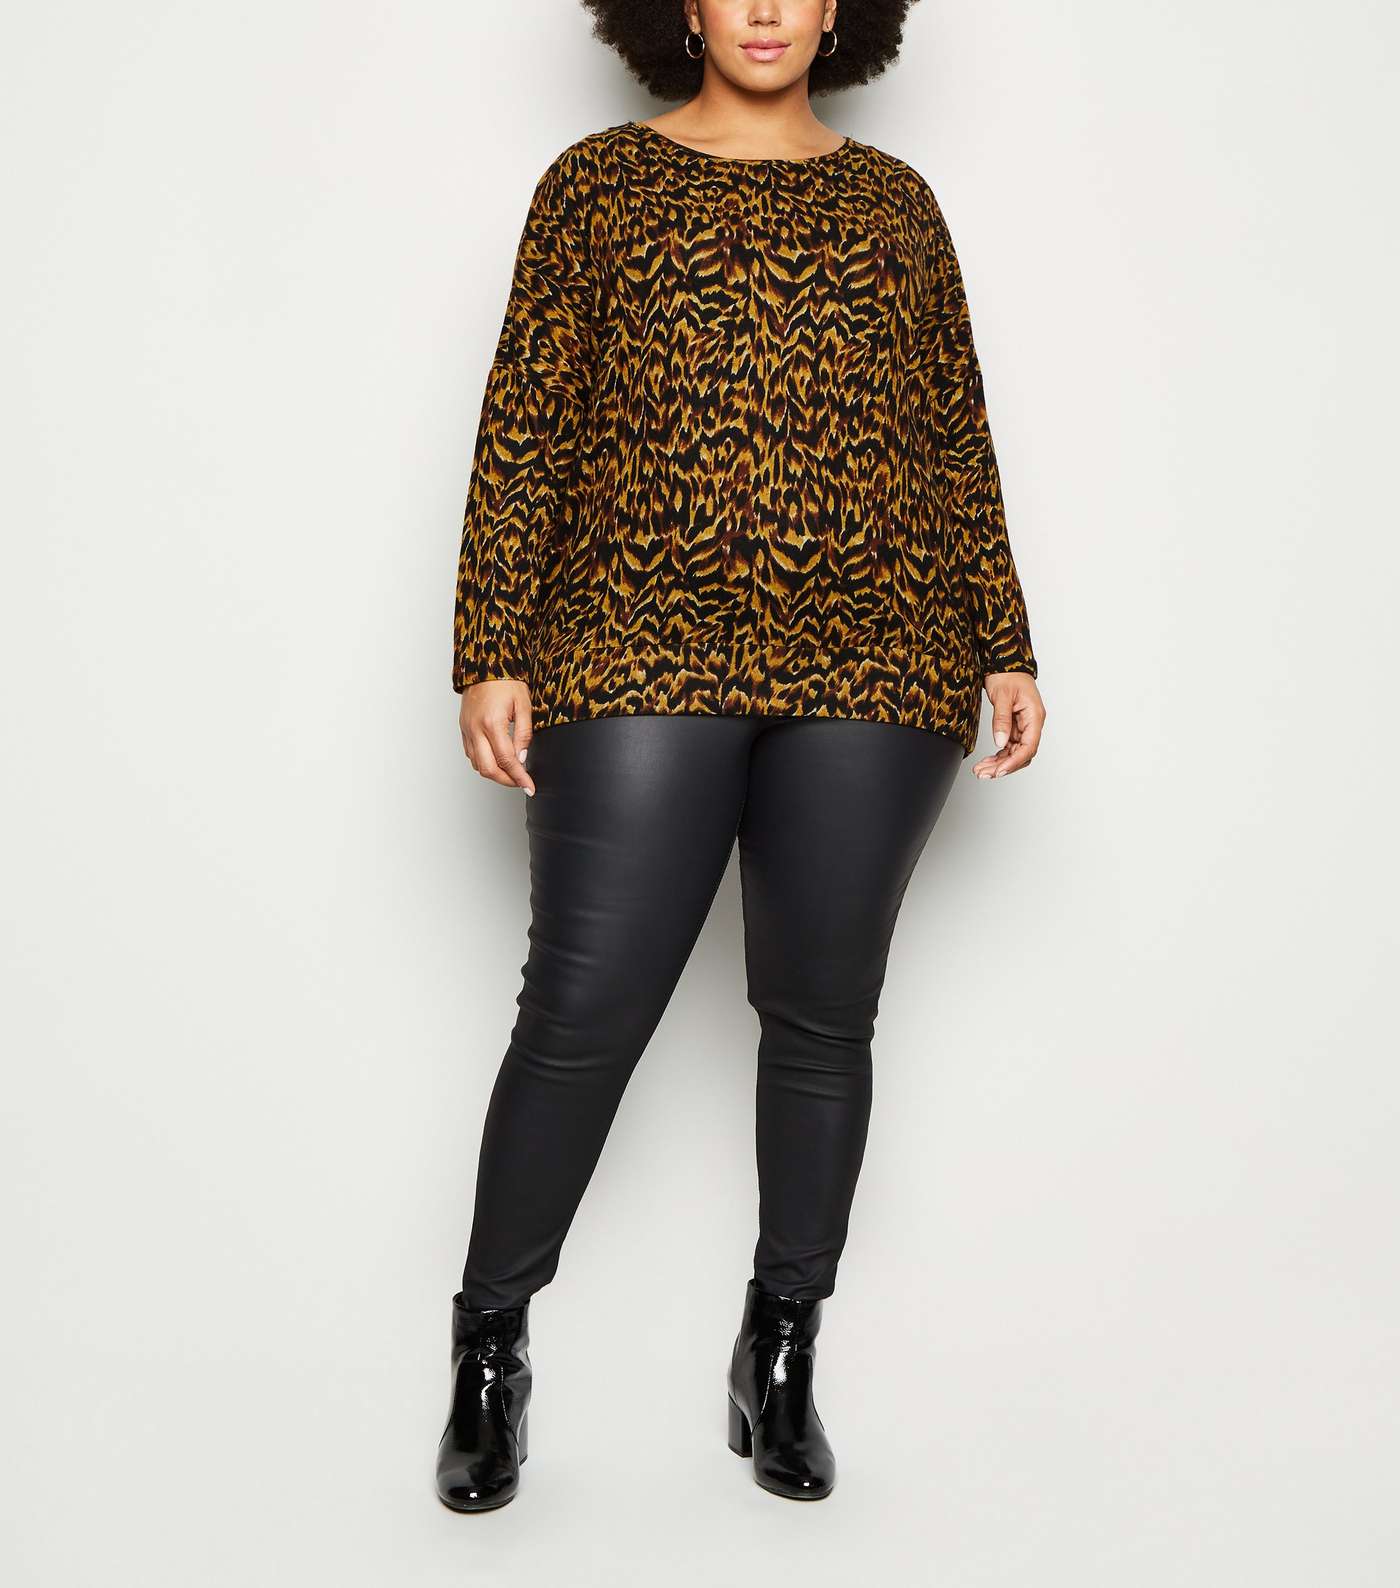 Apricot Curves Brown Animal Print Oversized Top Image 2